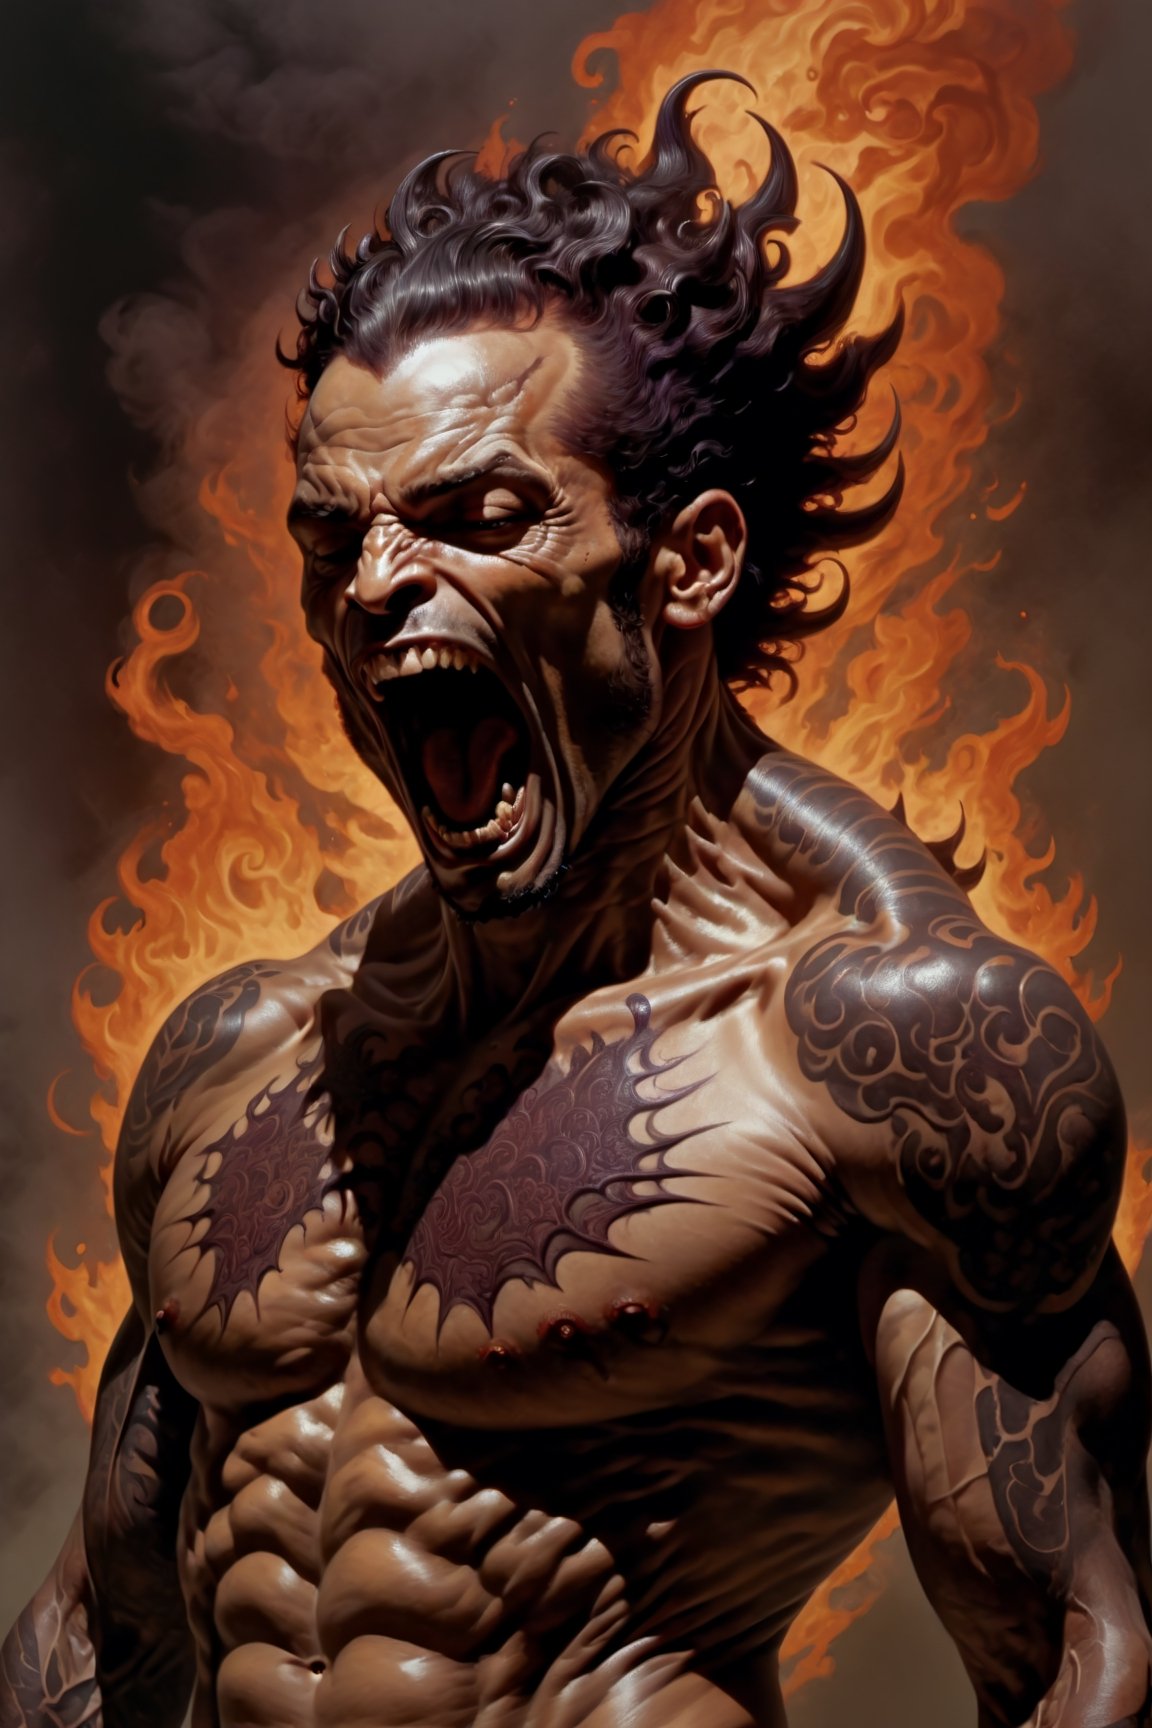 An sexy black african mans arm and shoulder, mid shot, man is bellowing , raging and staring at the viewer, the arm and shoulder is covered in a detailed intricate dark purple and crimson dragon tattoo on his chest and back that is protruding out, out in to reality, its screaming, scratching, smoking, similar to dragon tattoo by Boris Vallejo, frank frazetta style, slowly you see the small dragon tattoo in parts is coming out of the skin and becoming a real version of the tattoo, sticking out, scales, extended claws, 16K, cinematic movie still, like the movie the 300,